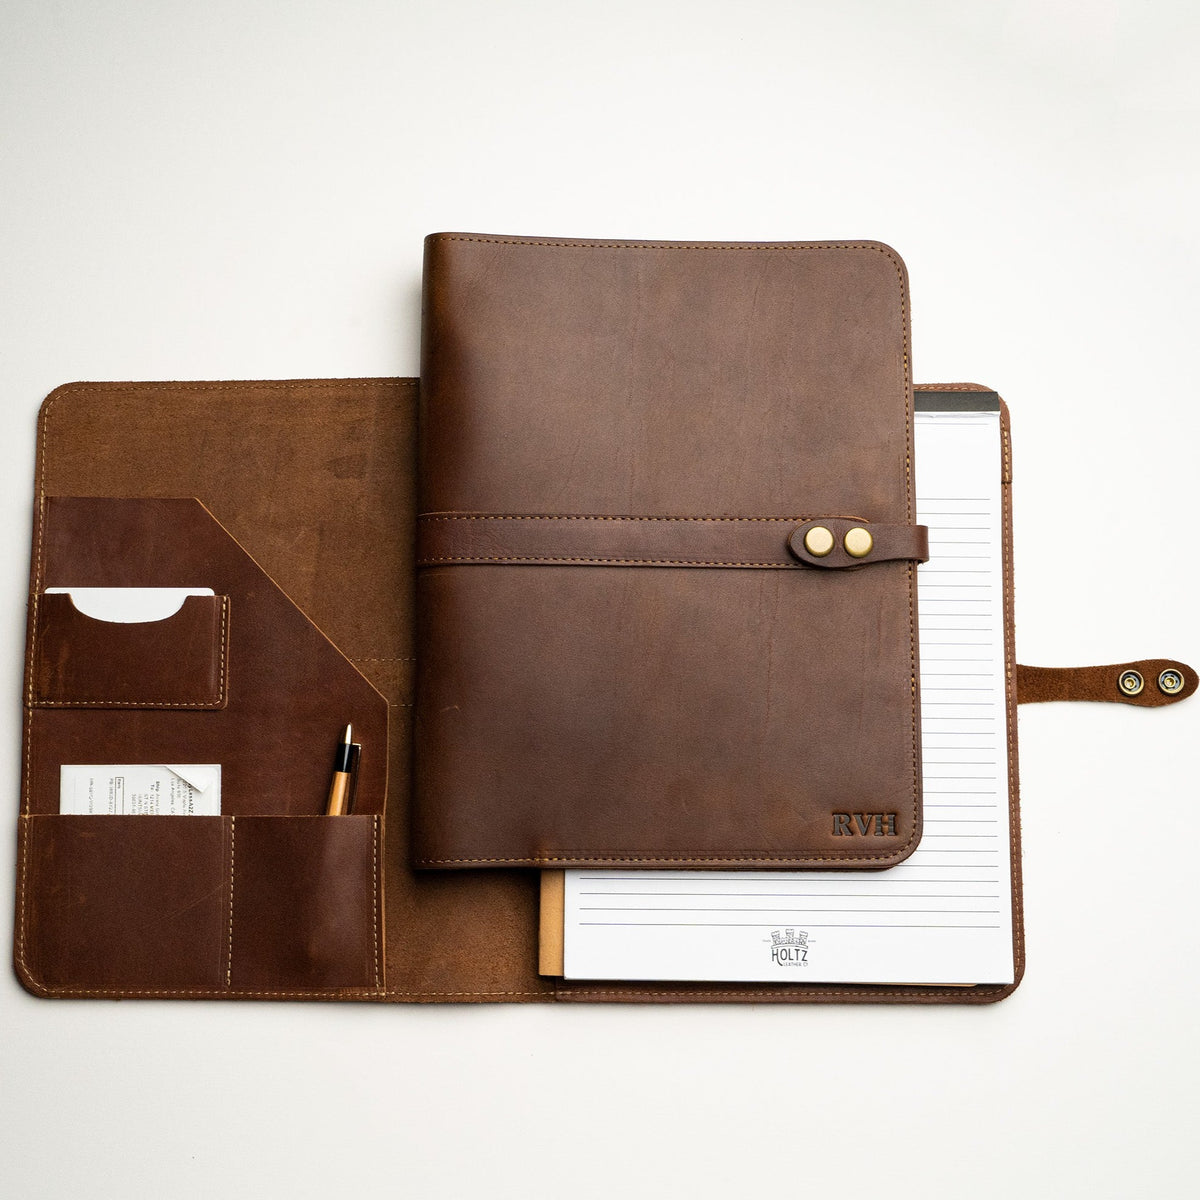 Leather journal shown both open and closed; Outside has personalized initials and inside include a journal and pockets for papers, business cards, and pens; from Holtz Leather Co in Huntsville, Alabama